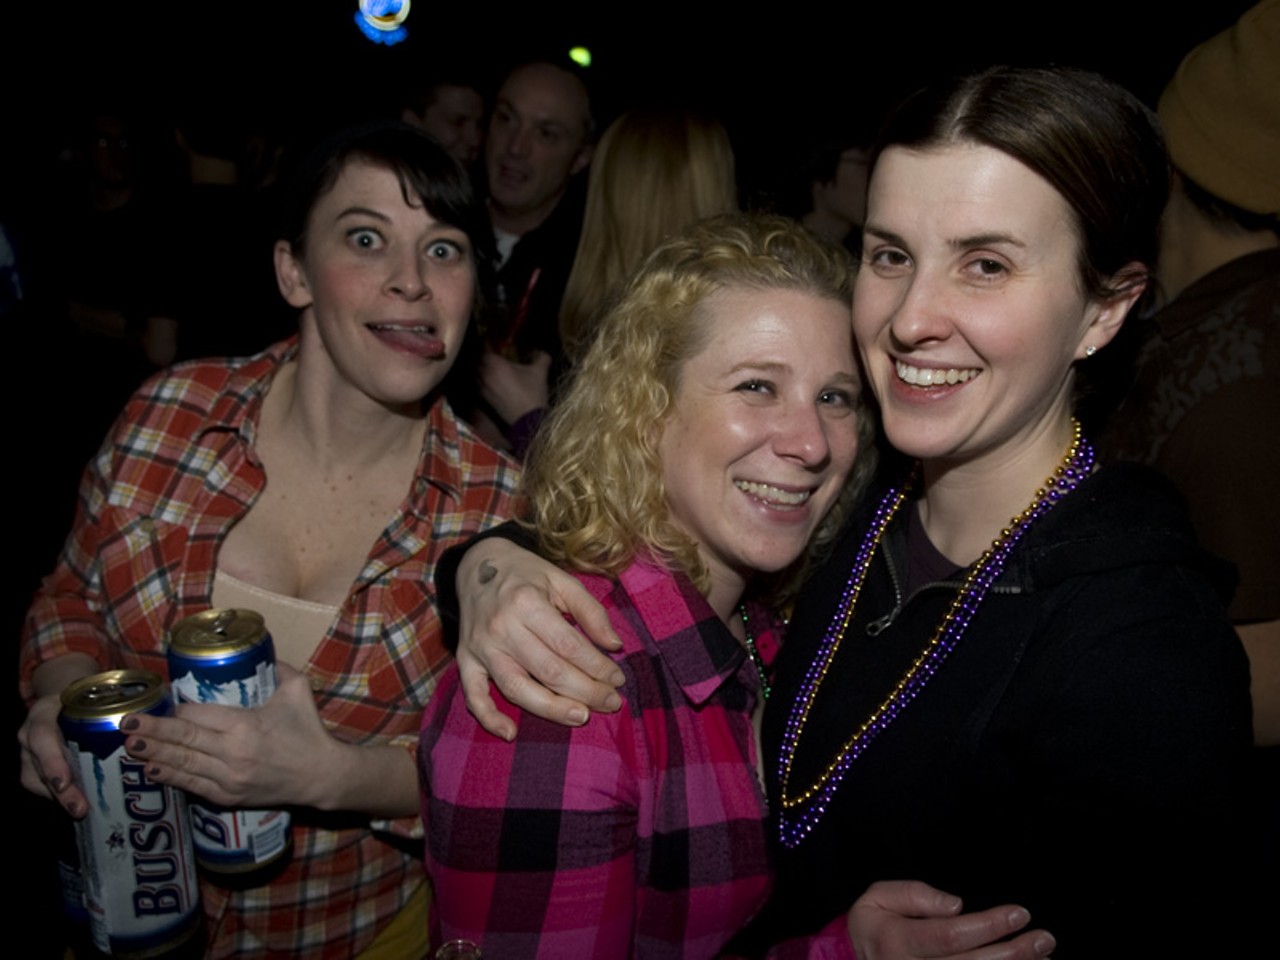 Members of the audience at the Langhorne Slim show on Friday, February 12, 2010 at Off Broadway.